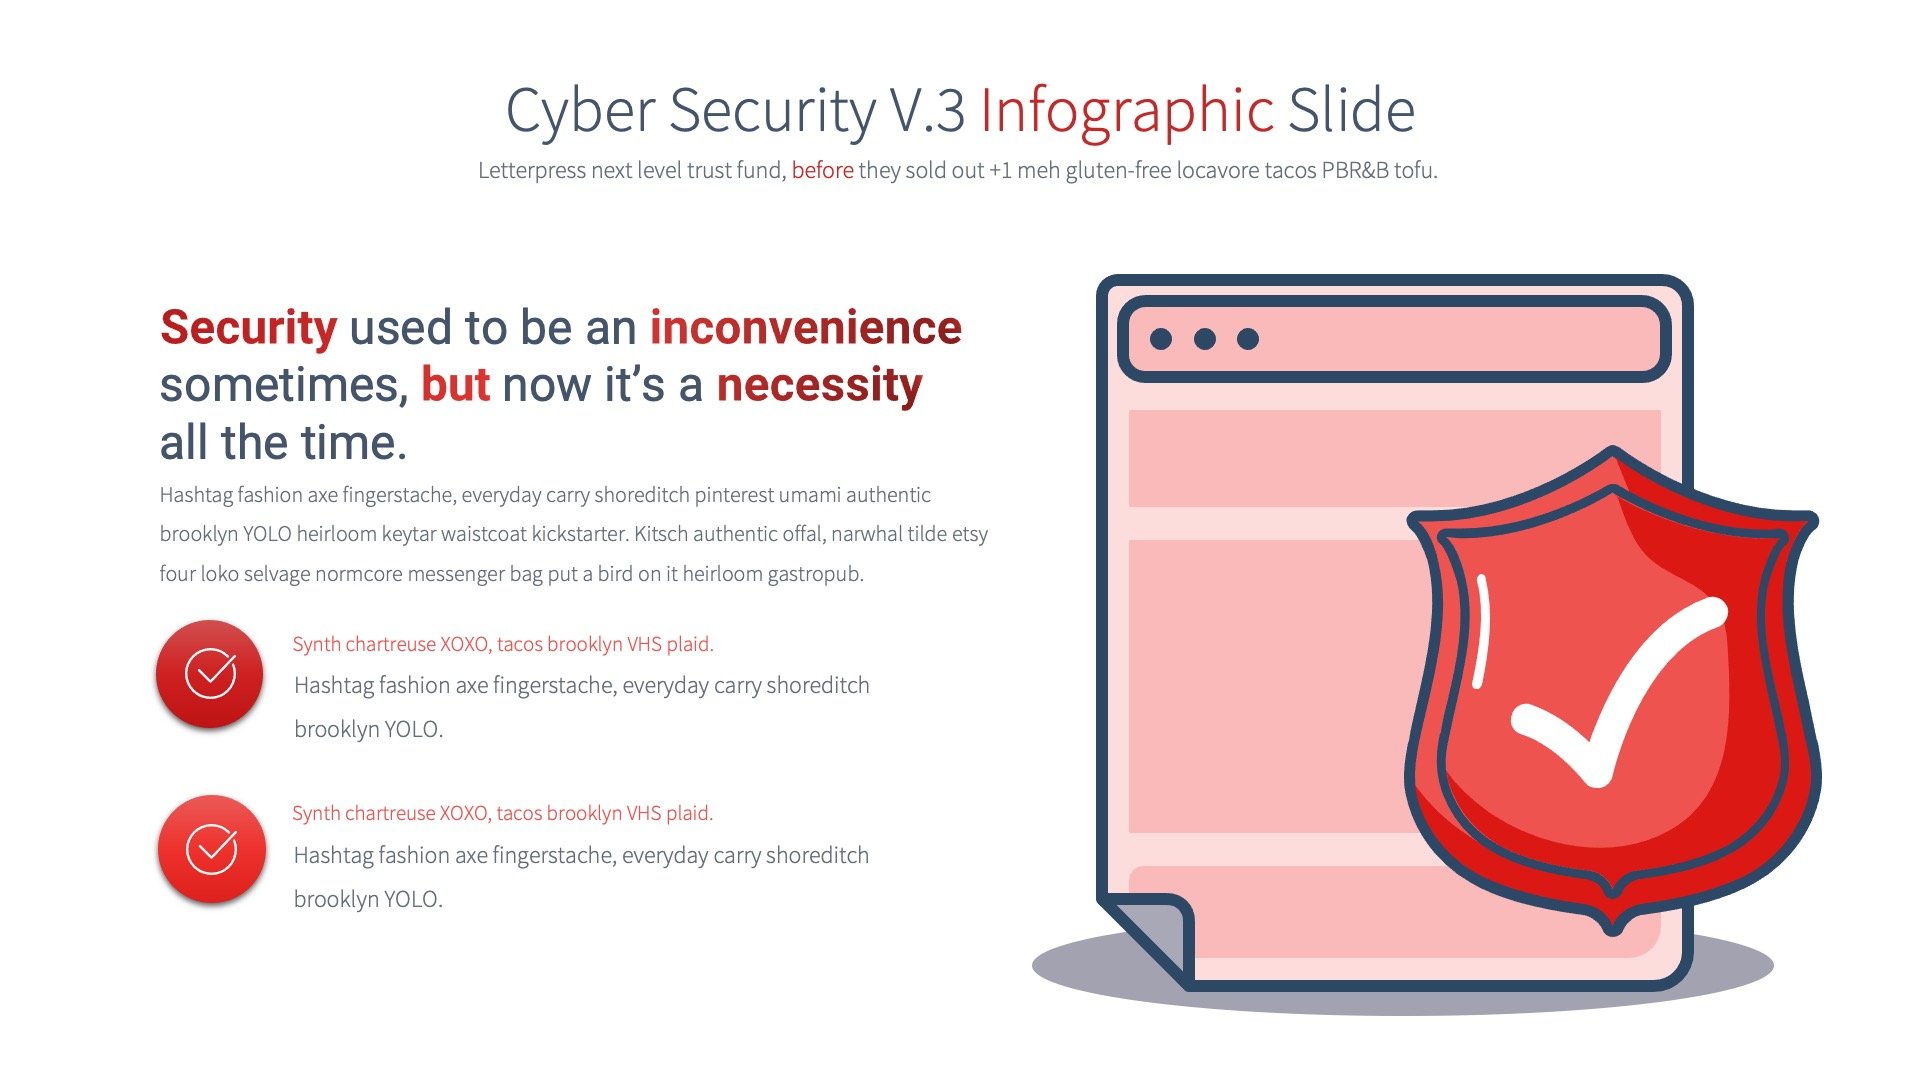 A new level of security infographic.